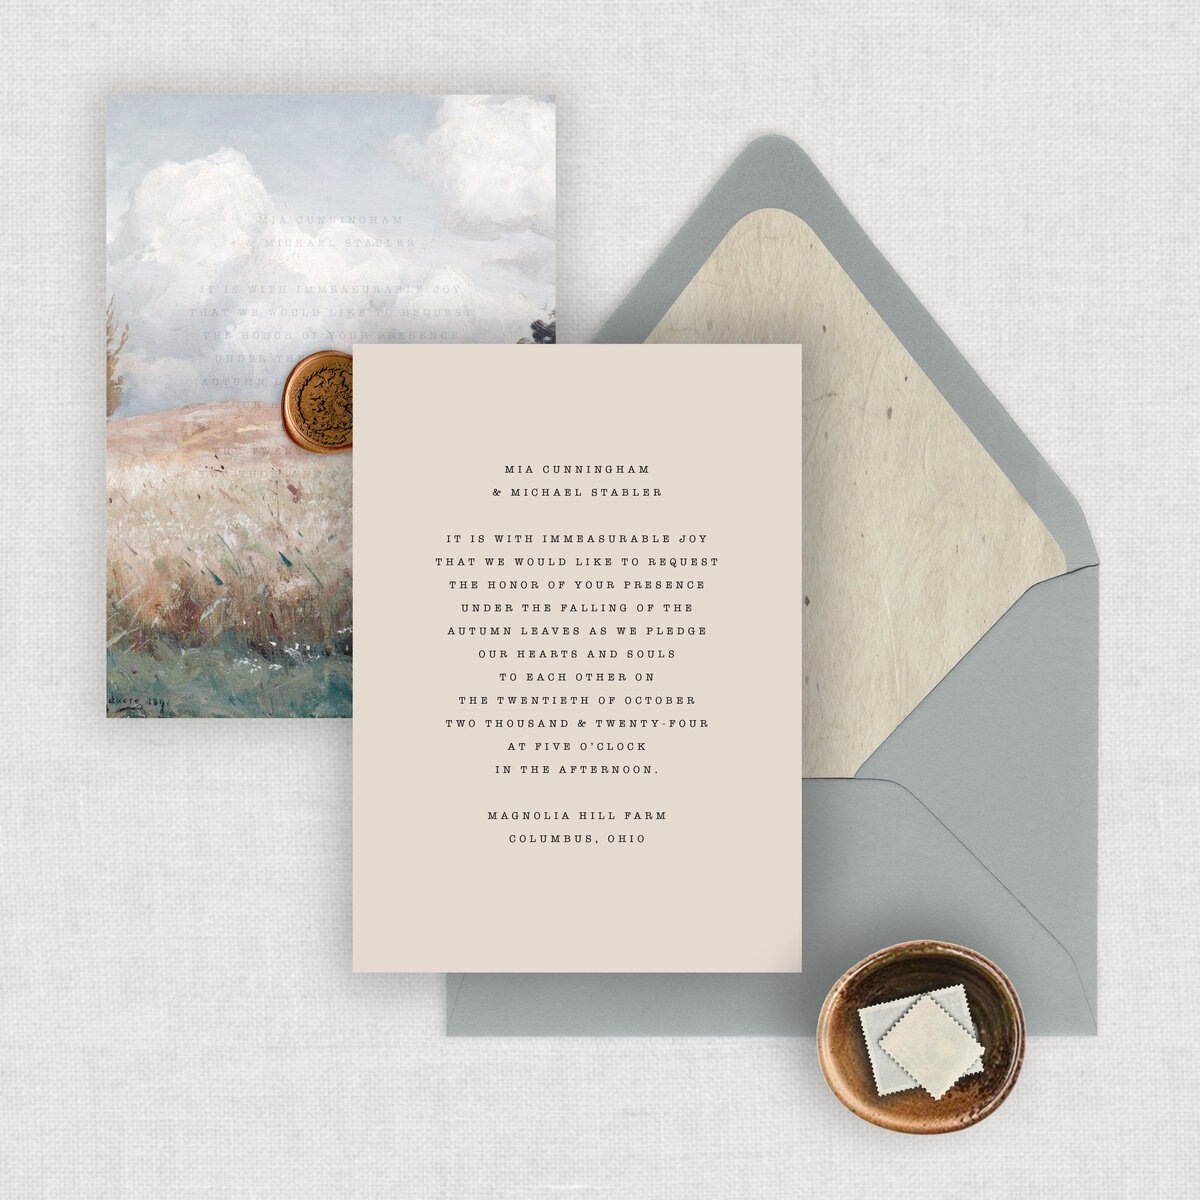 Typewriter wedding invitation suite is a simple wedding invitation with printed vellum invitation wrap and a copper wax seal.